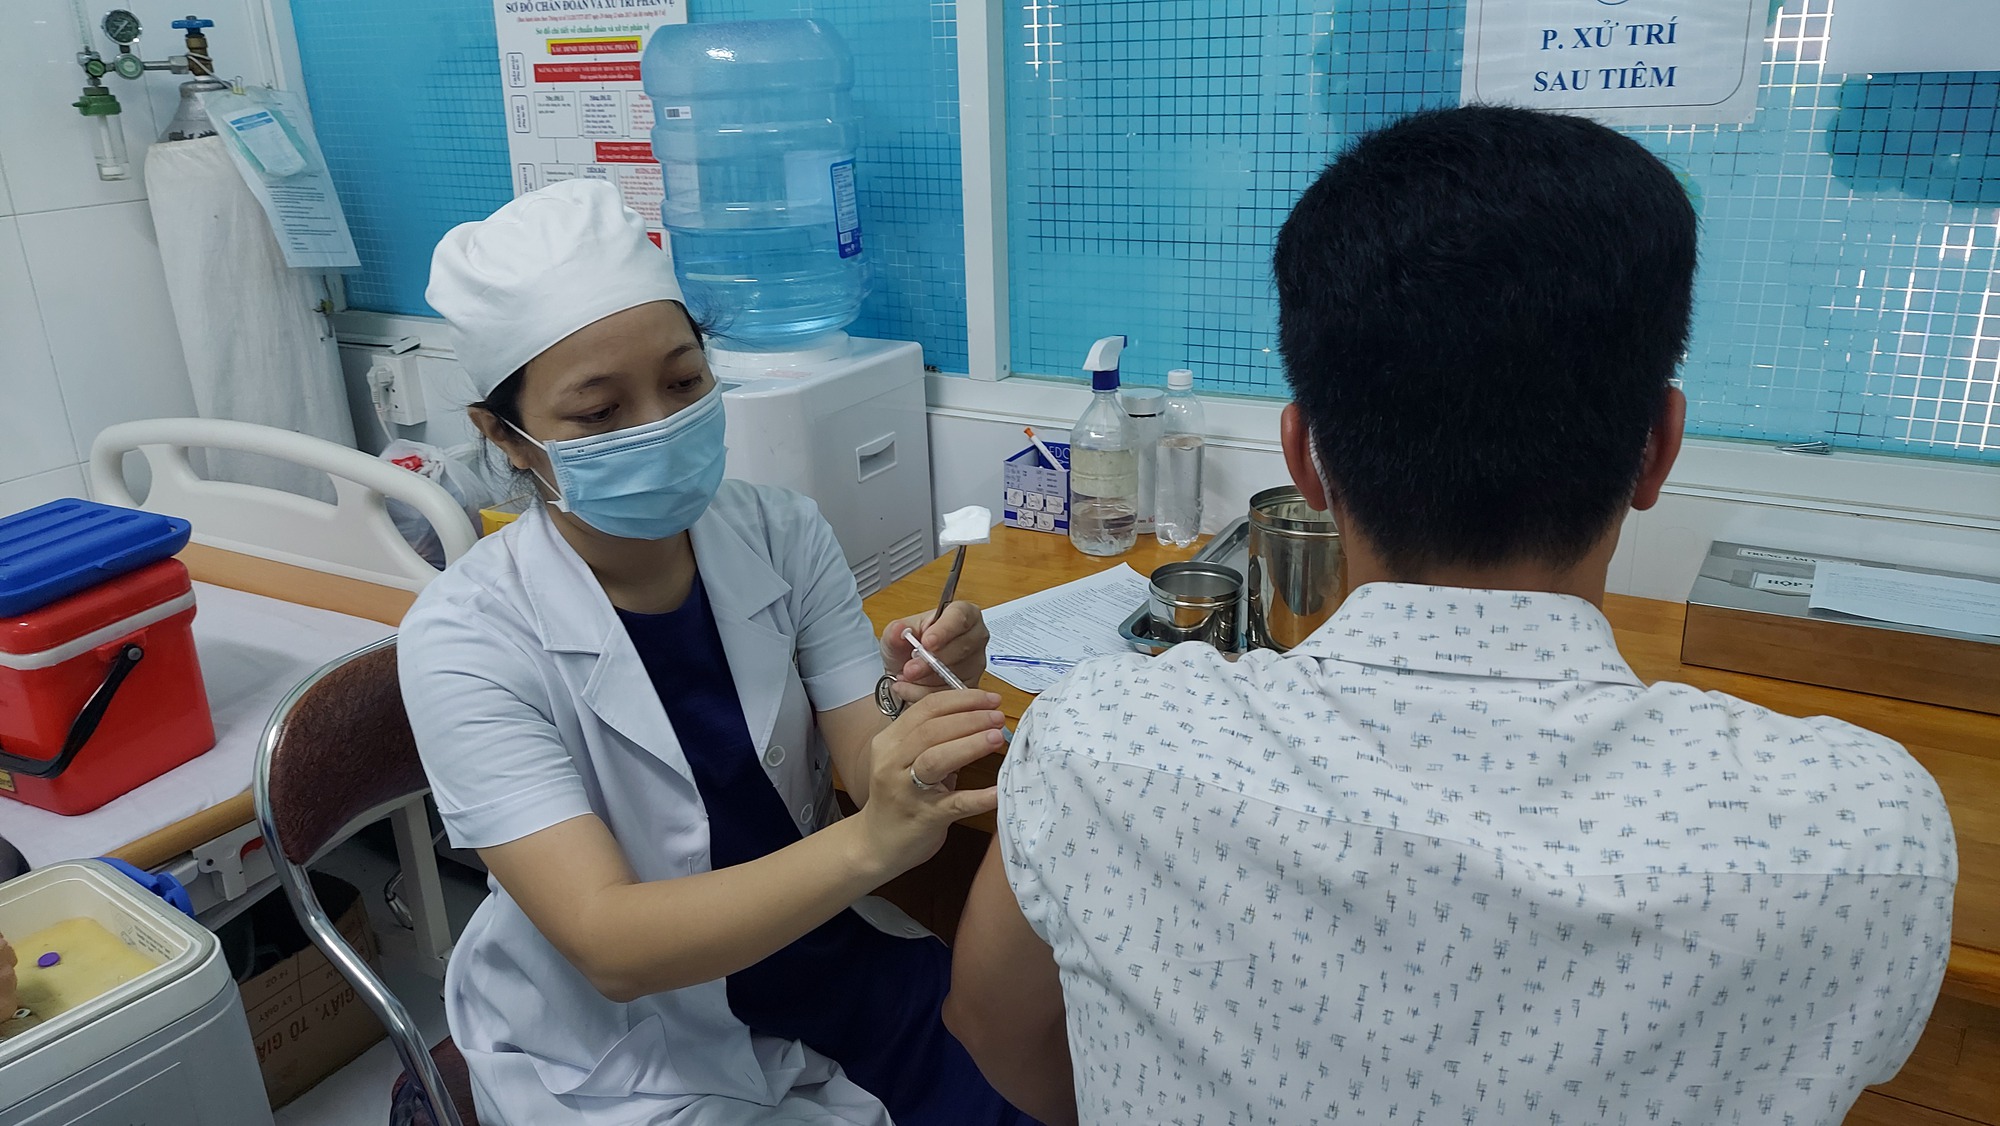 Worried about the BA.5 strain, people in Ho Chi Minh City line up to inject the Covid-19 vaccine - Photo 5.